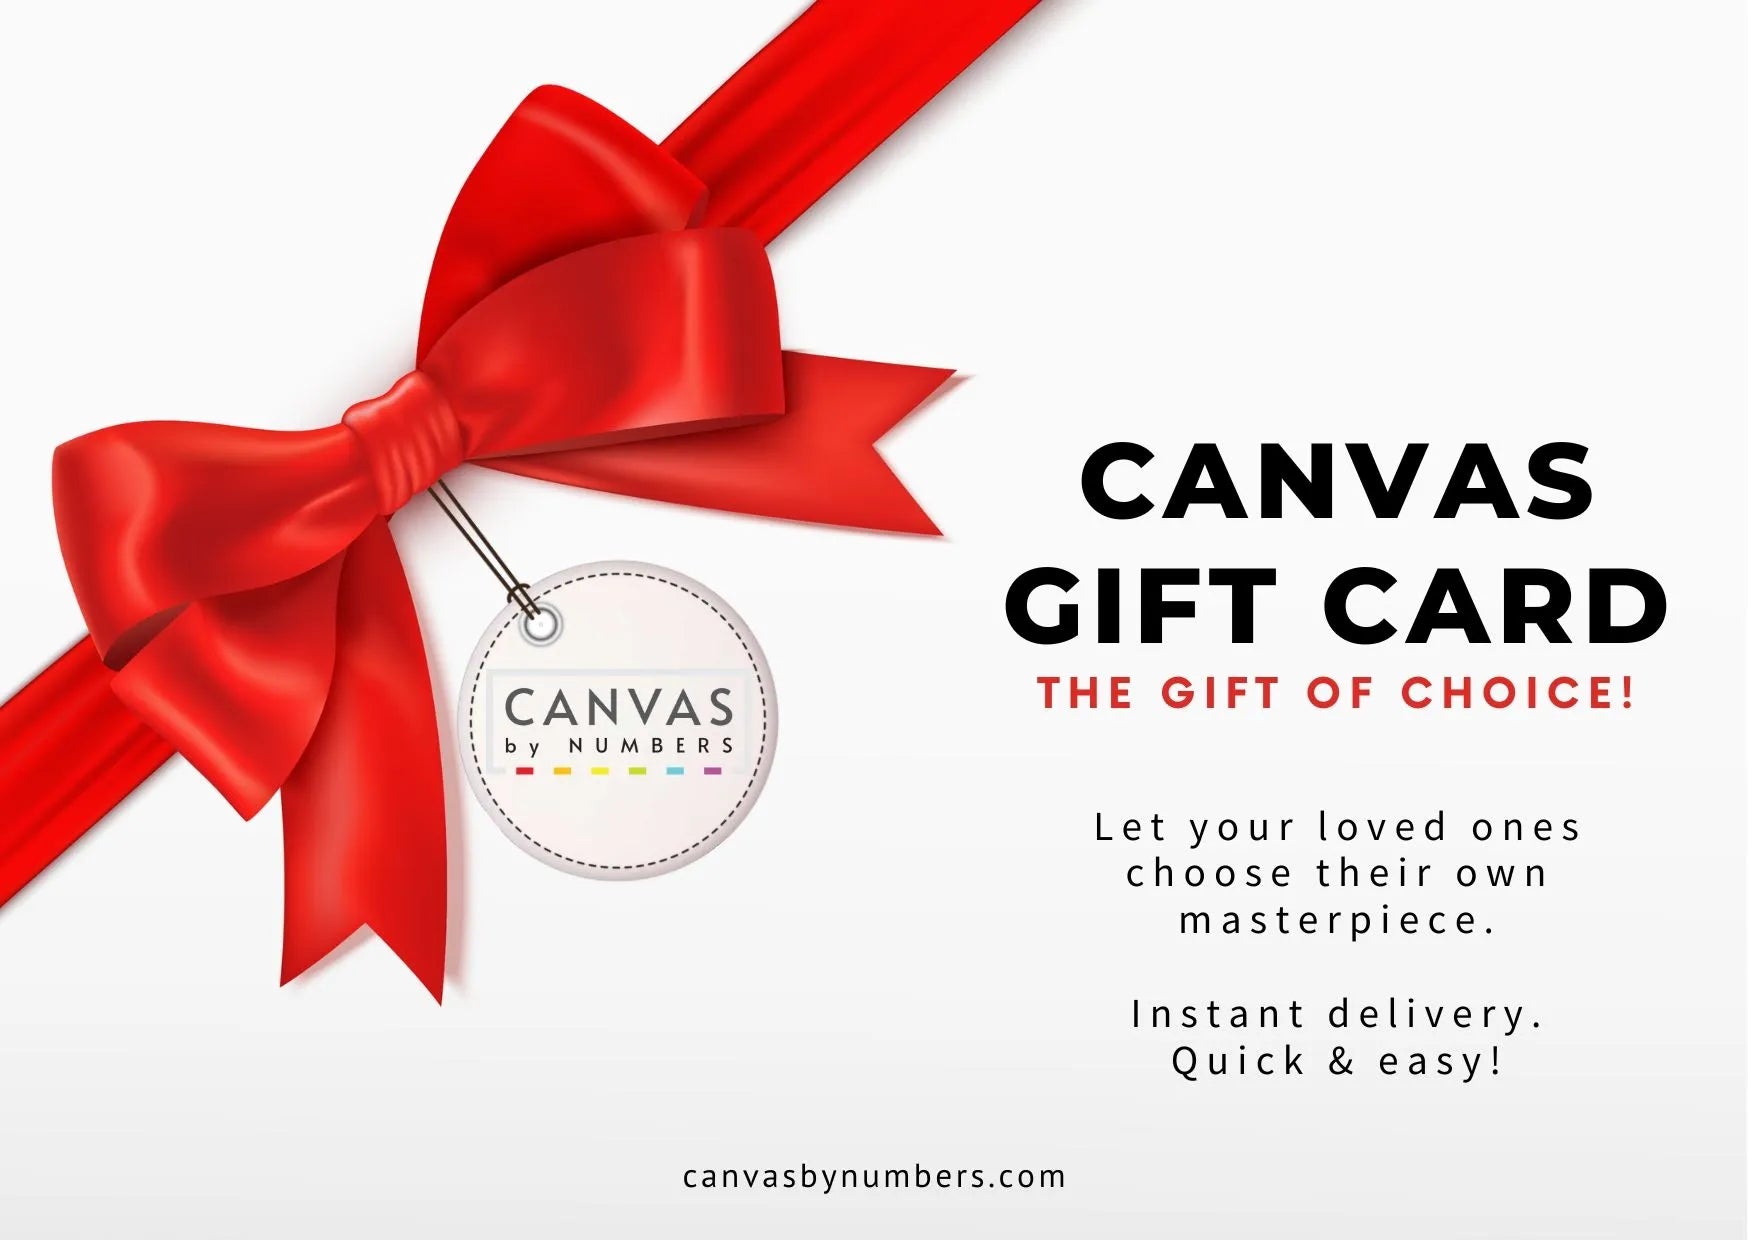 Canvas by Numbers Gift Card for paint by numbers lovers